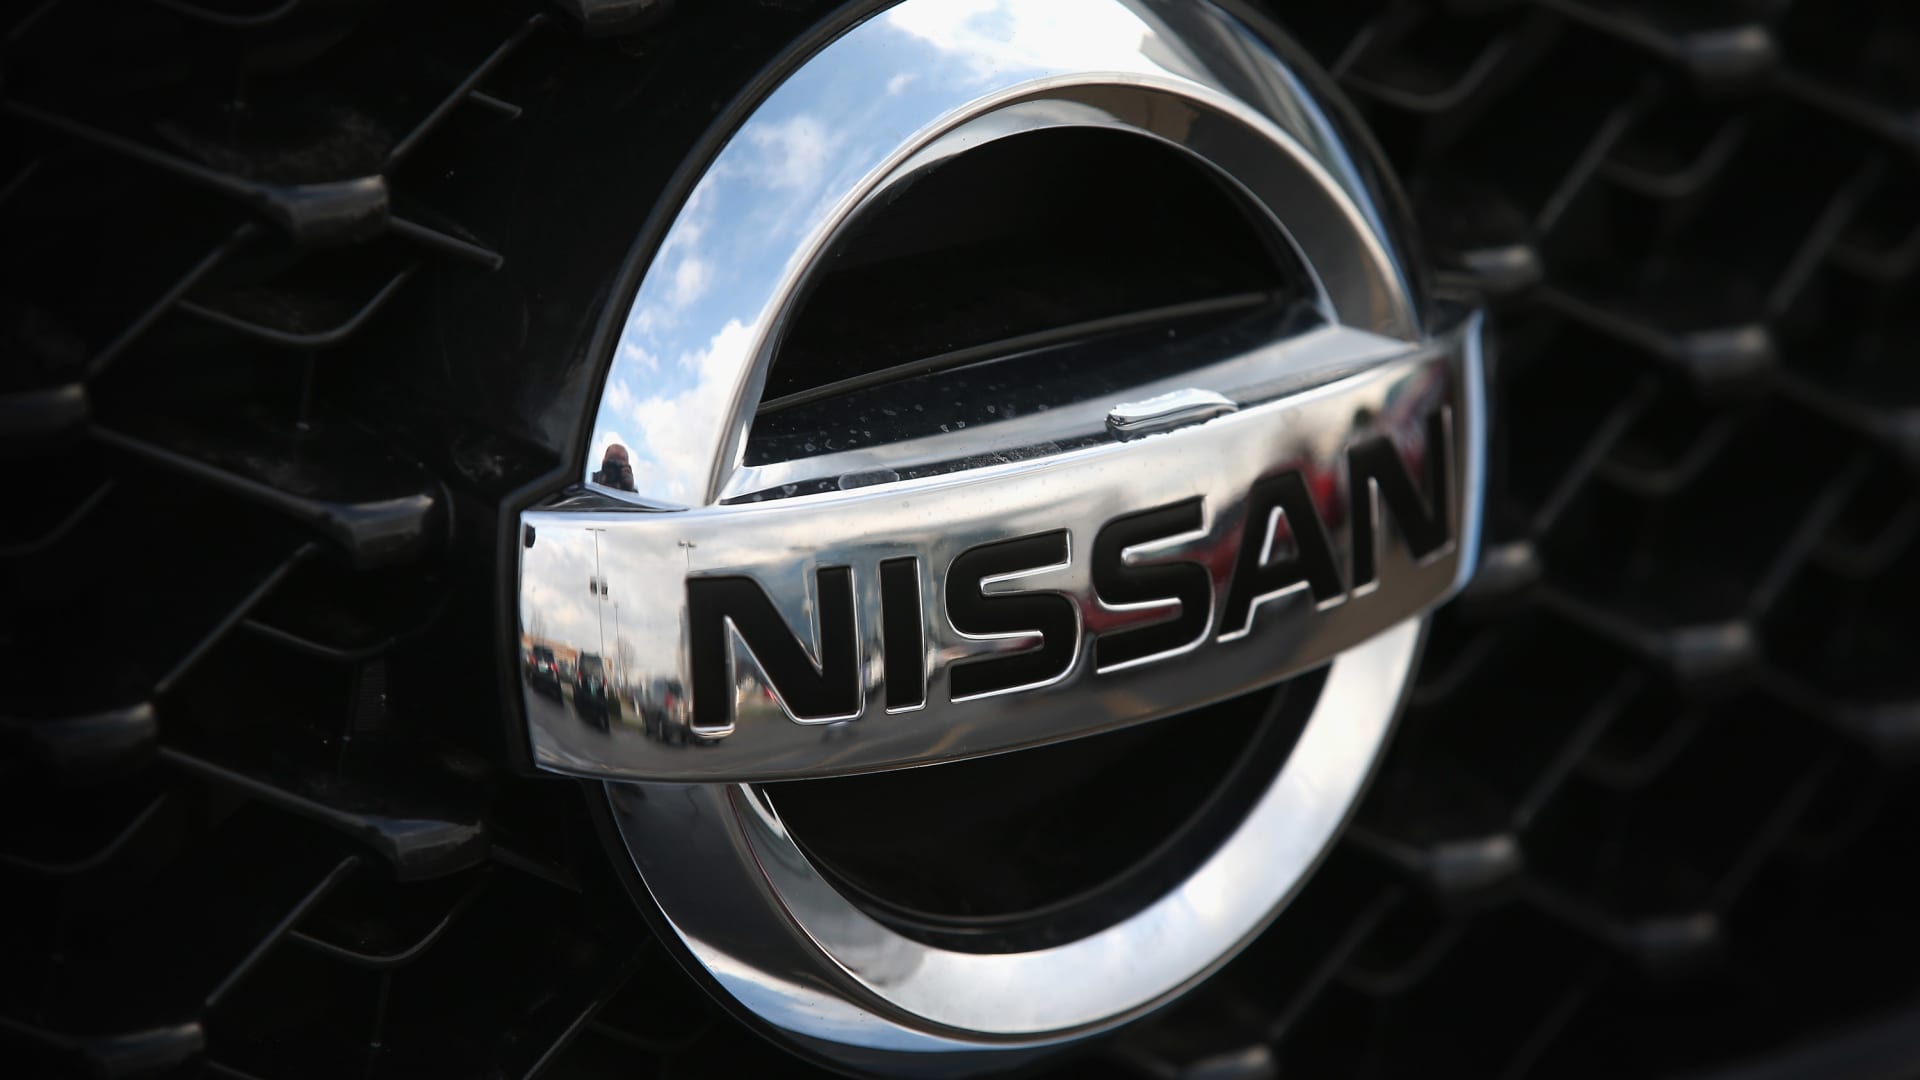 Nissan recalls more than 300,000 SUVs in U.S. for sudden hood opening